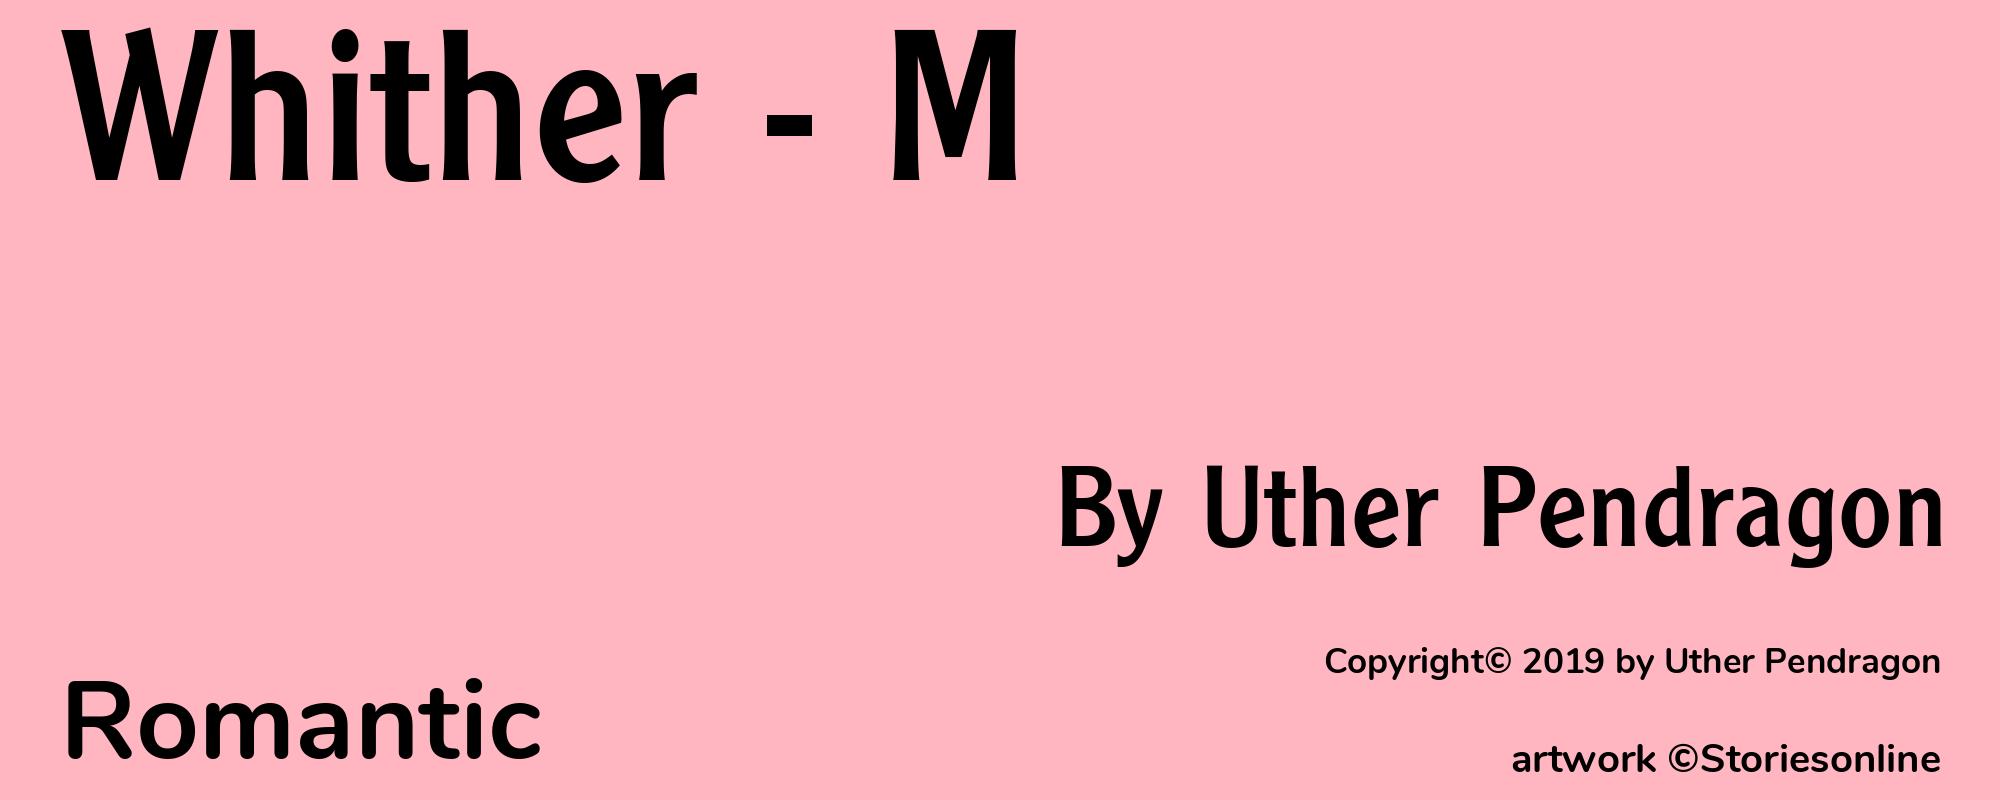 Whither - M - Cover